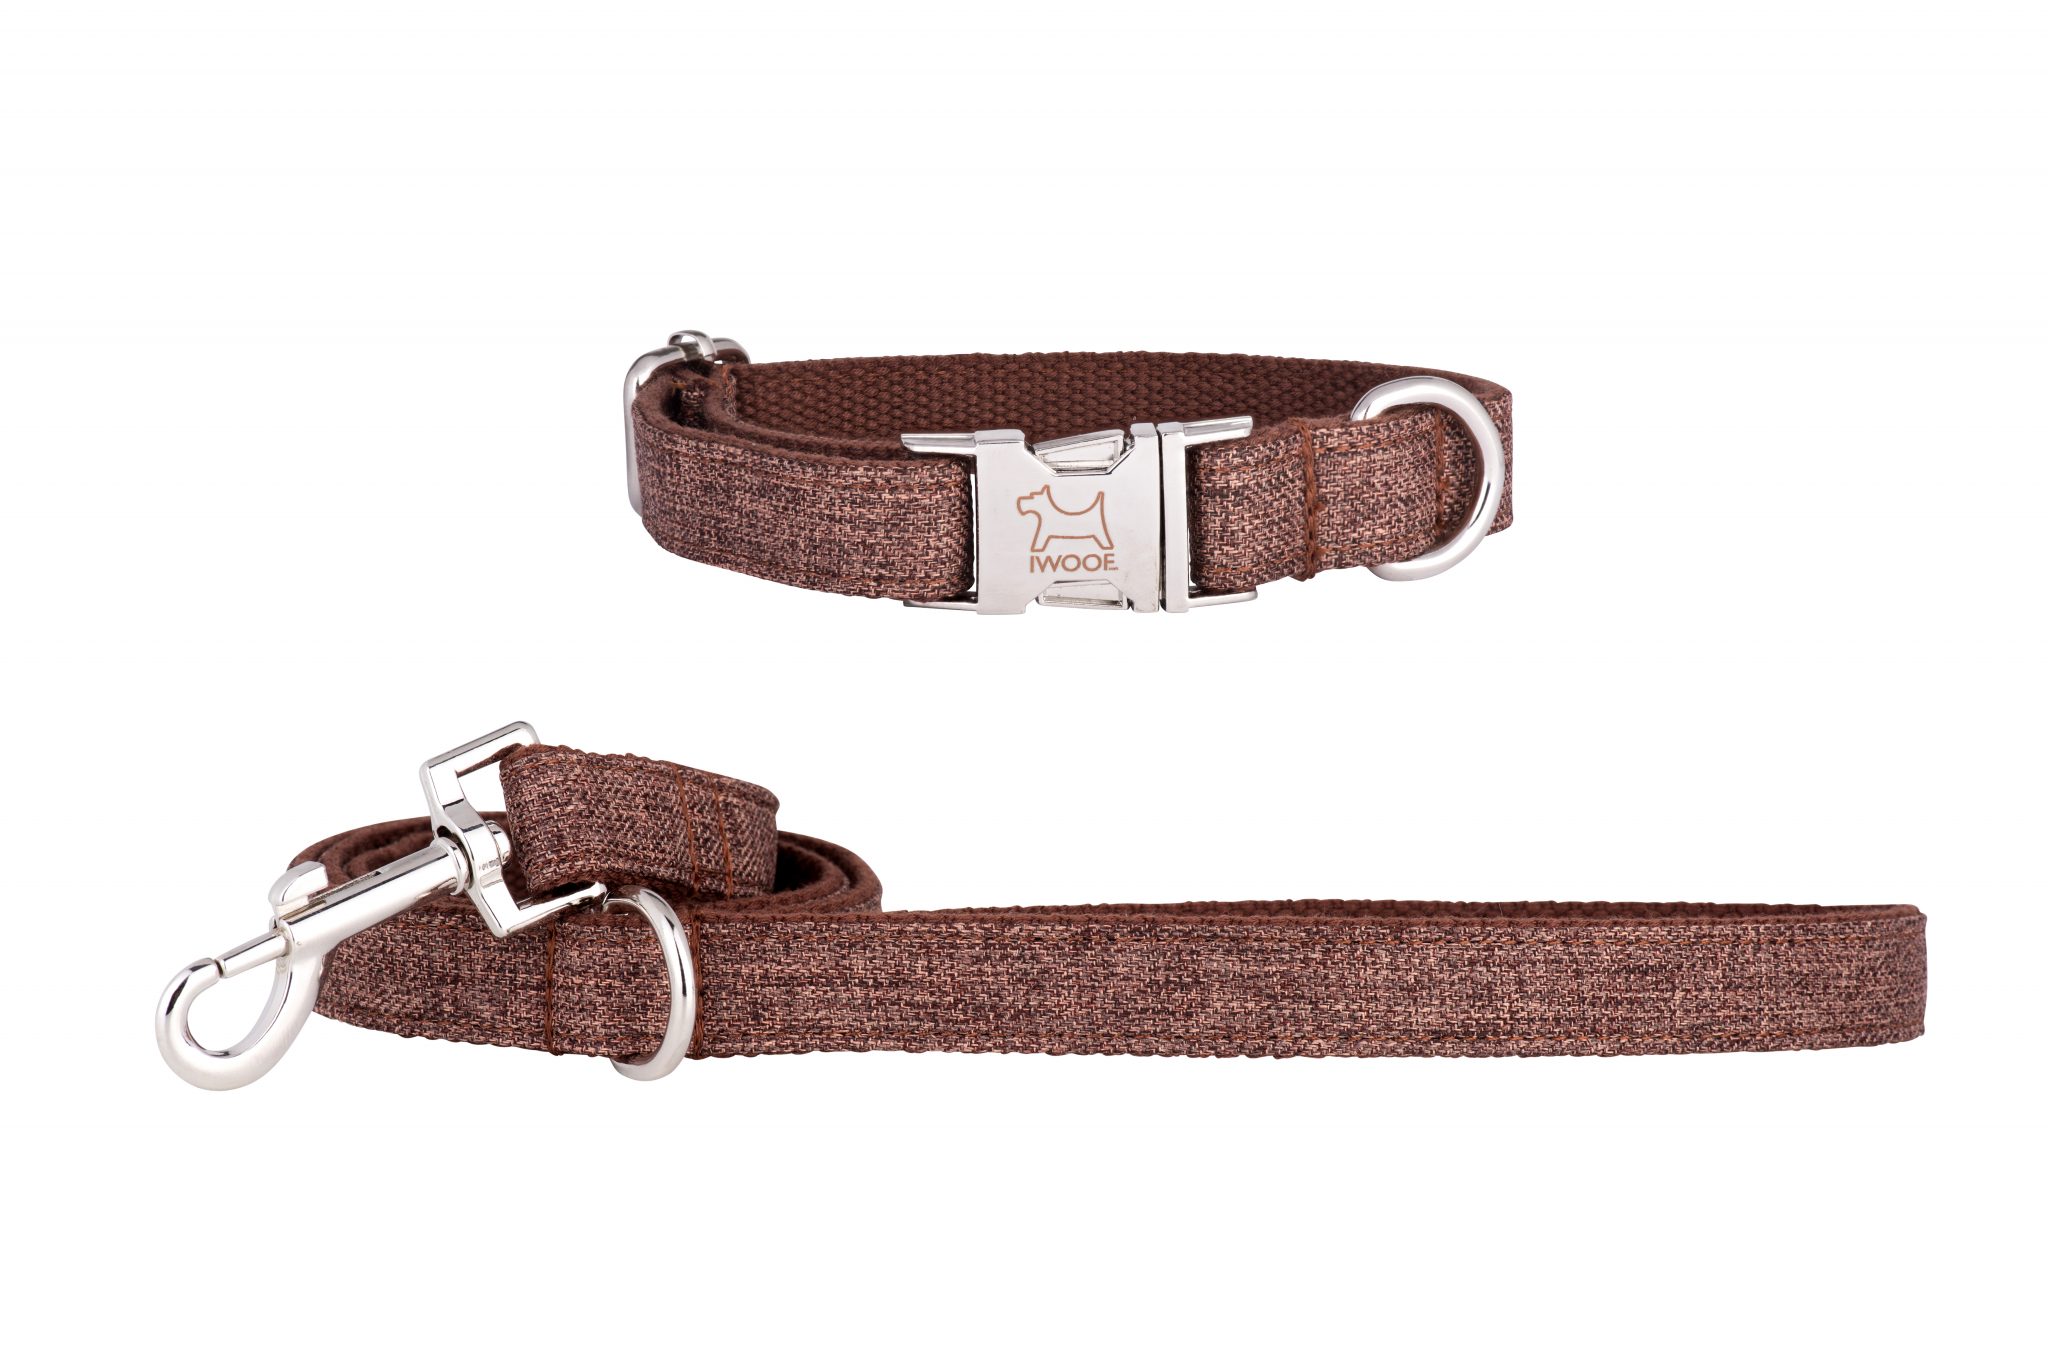 Muddy Puddle designer dog collar and dog lead by IWOOF